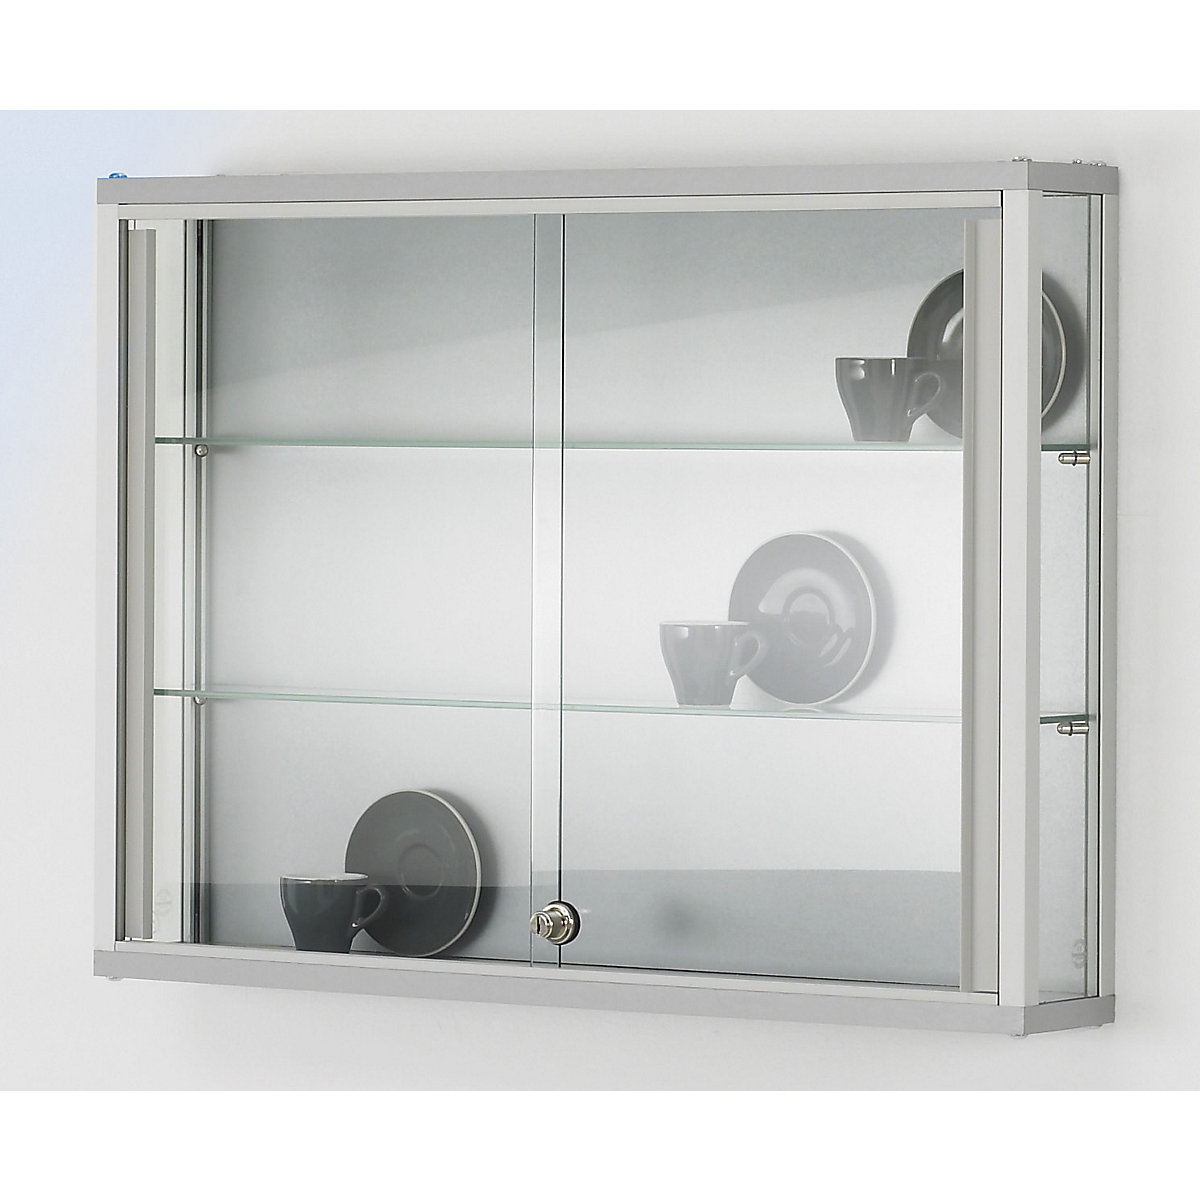 LINK wall mounted glass cabinet